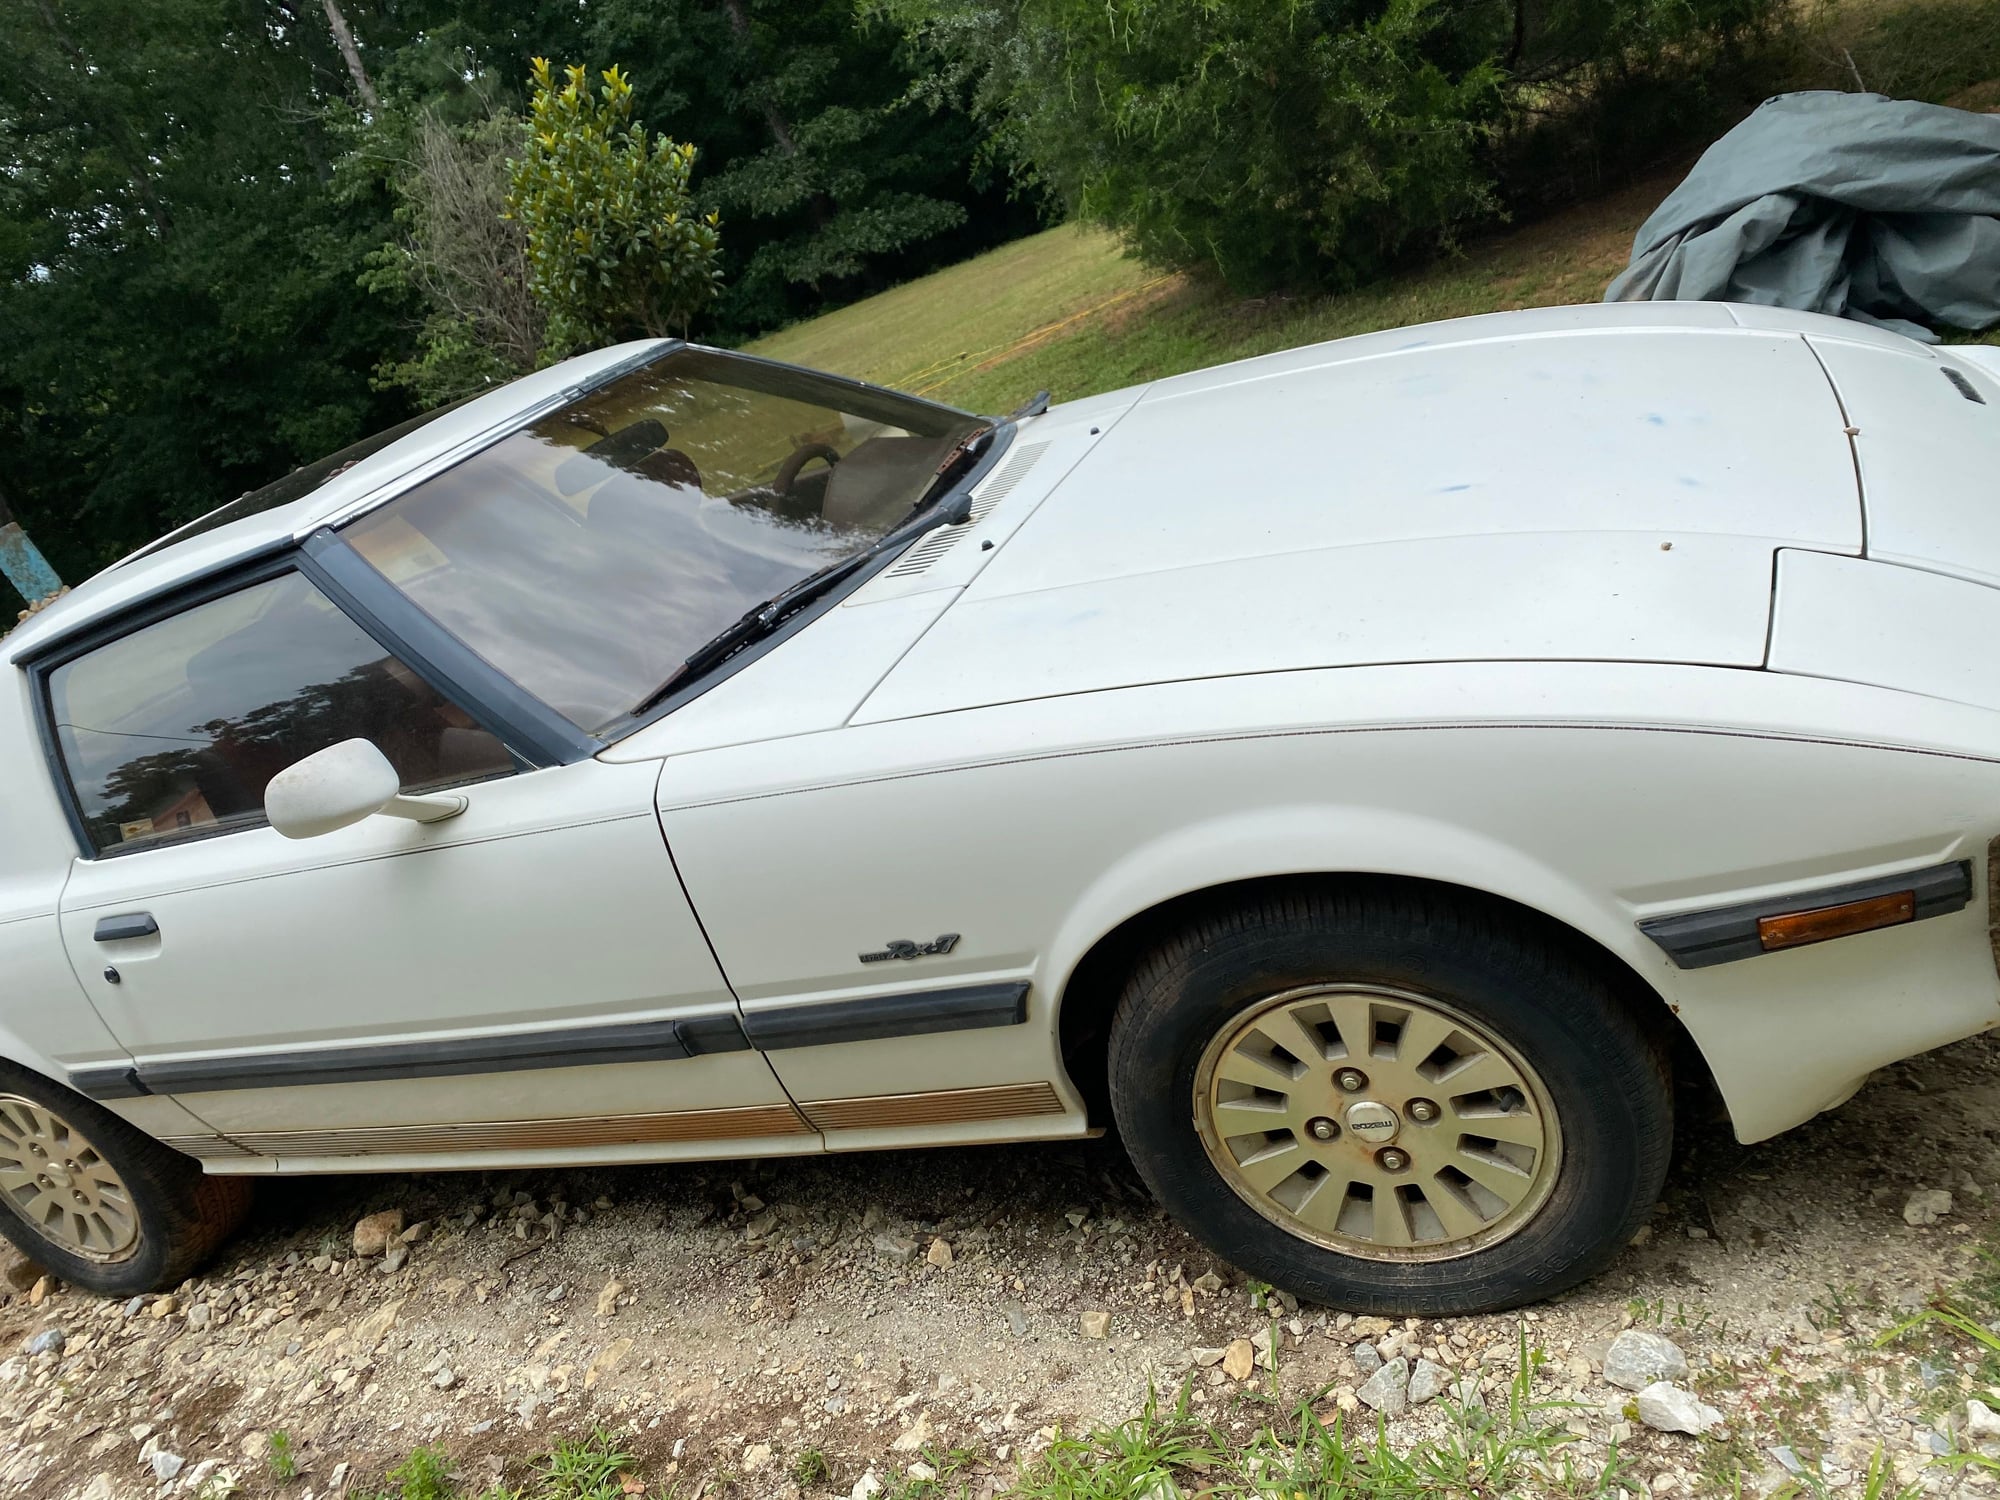 1985 Mazda RX-7 - FOR SALE - 1985 Classic RX-7 White - Used - VIN JM1FB3329F0894995 - 6 cyl - 2WD - Manual - Coupe - White - Valley, AL 36854, United States